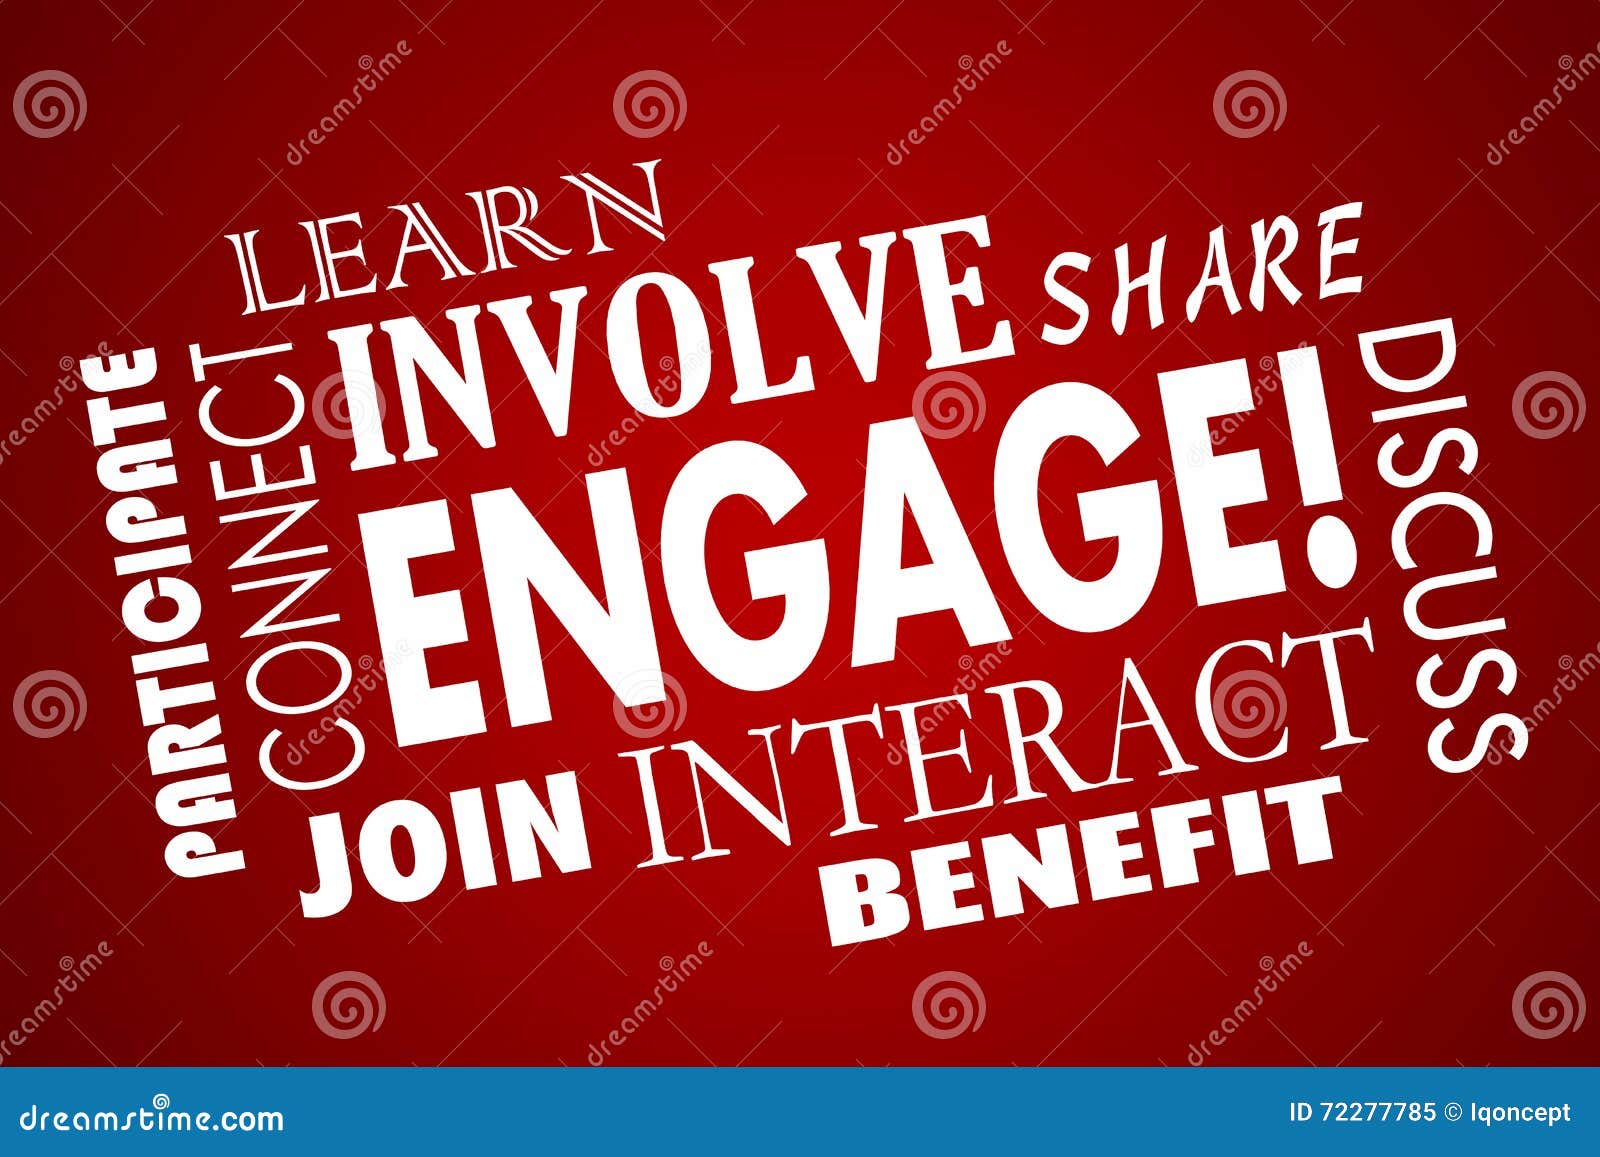 engage involve participate join interact collage